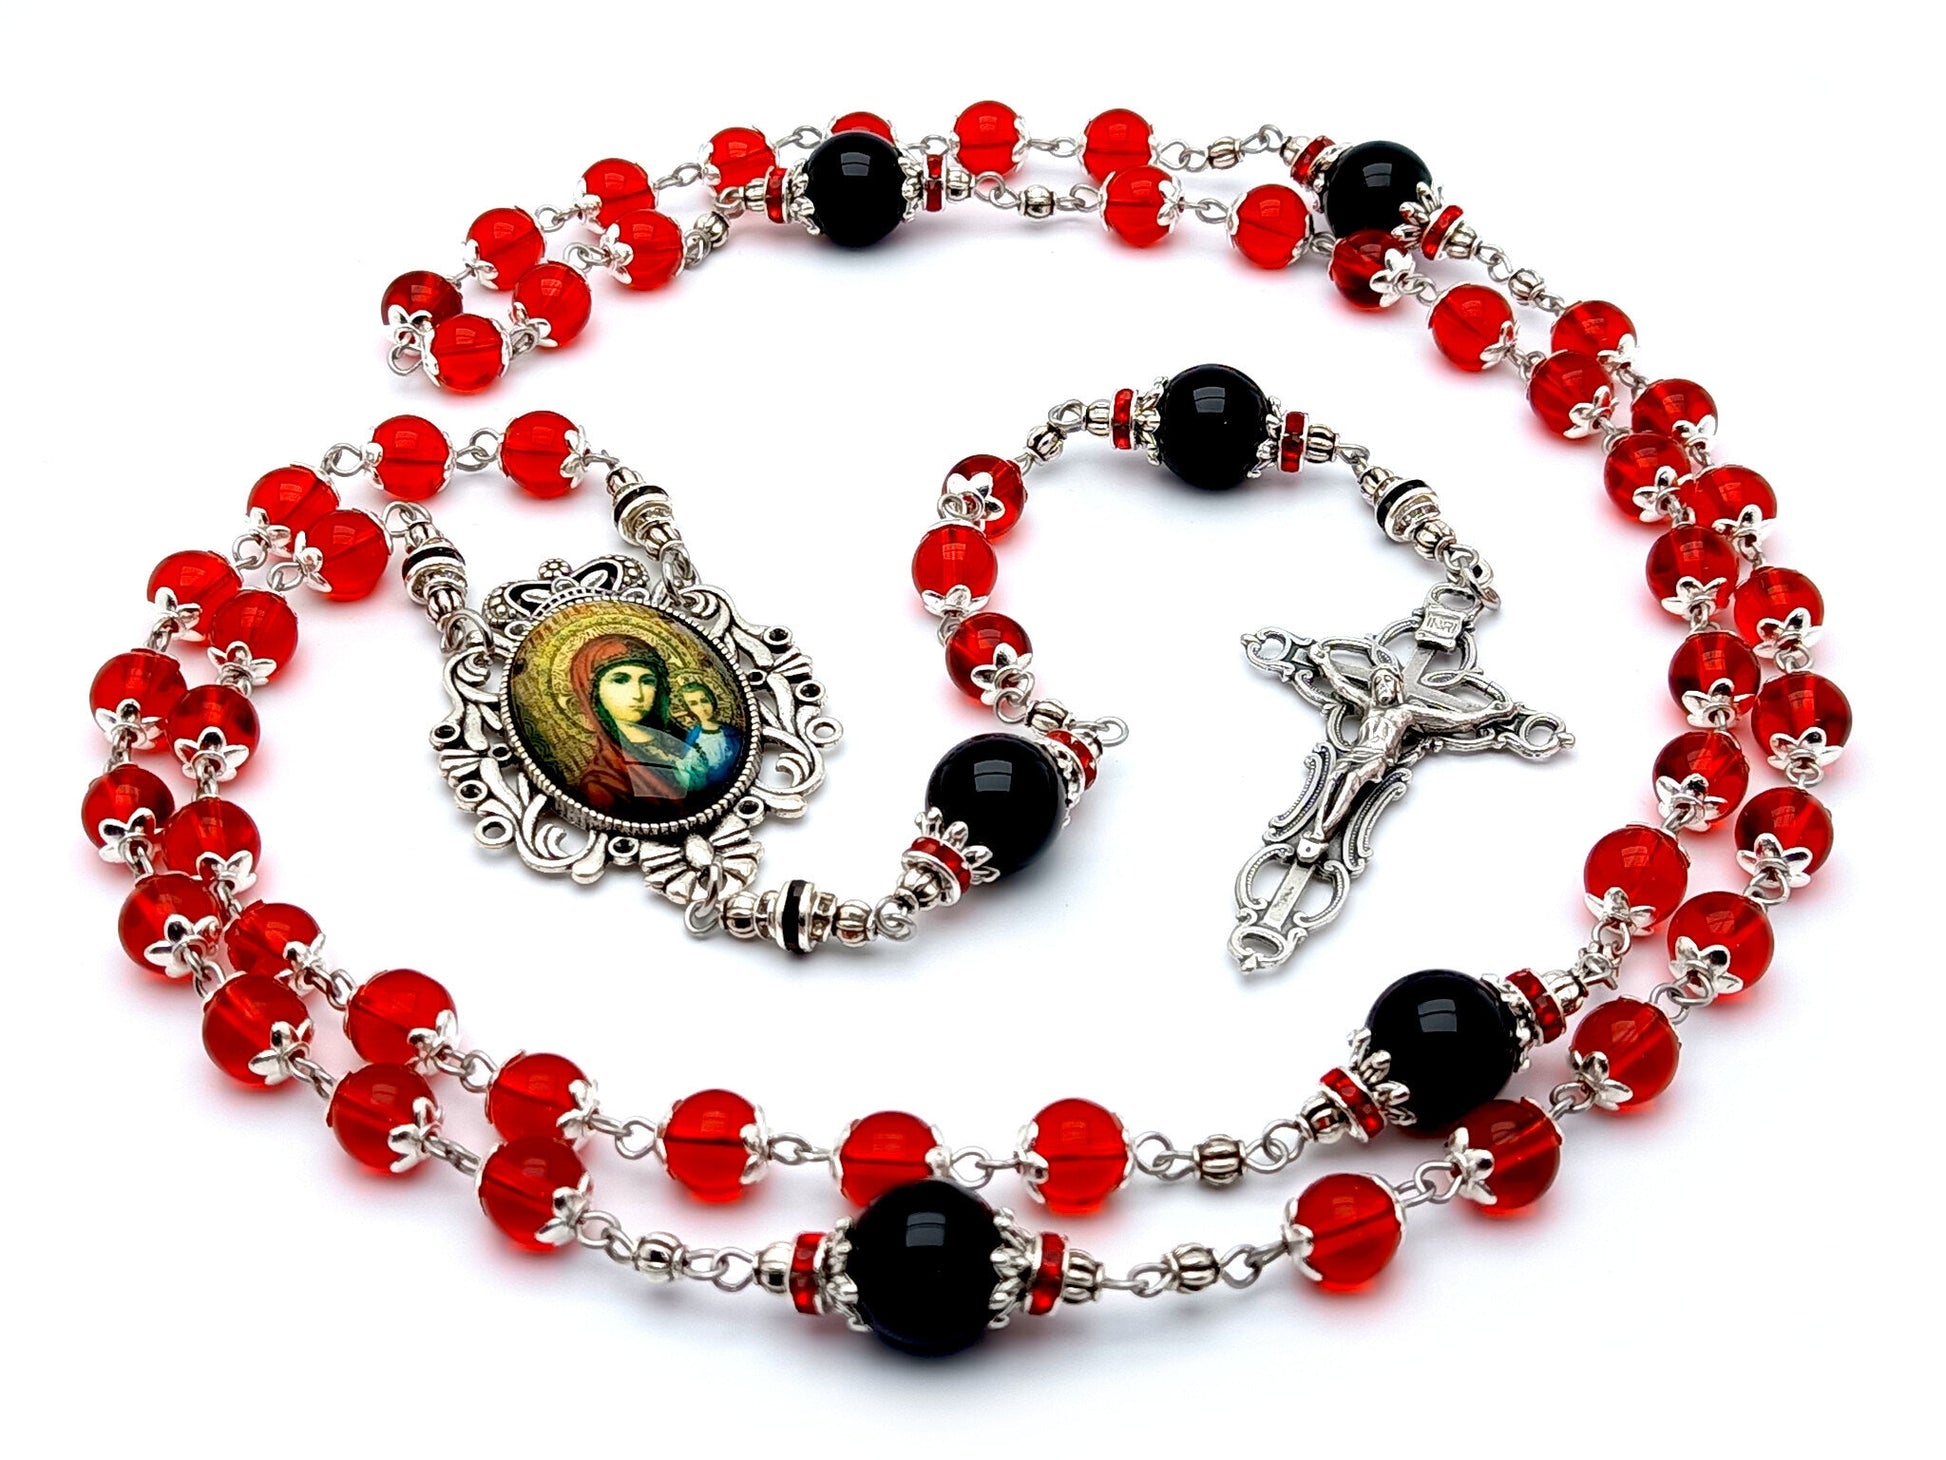 Our Lady of Perpetual Help unique rosary beads with red glass and onyx gemstone beads, silver filigree crucifix and picture centre medal.